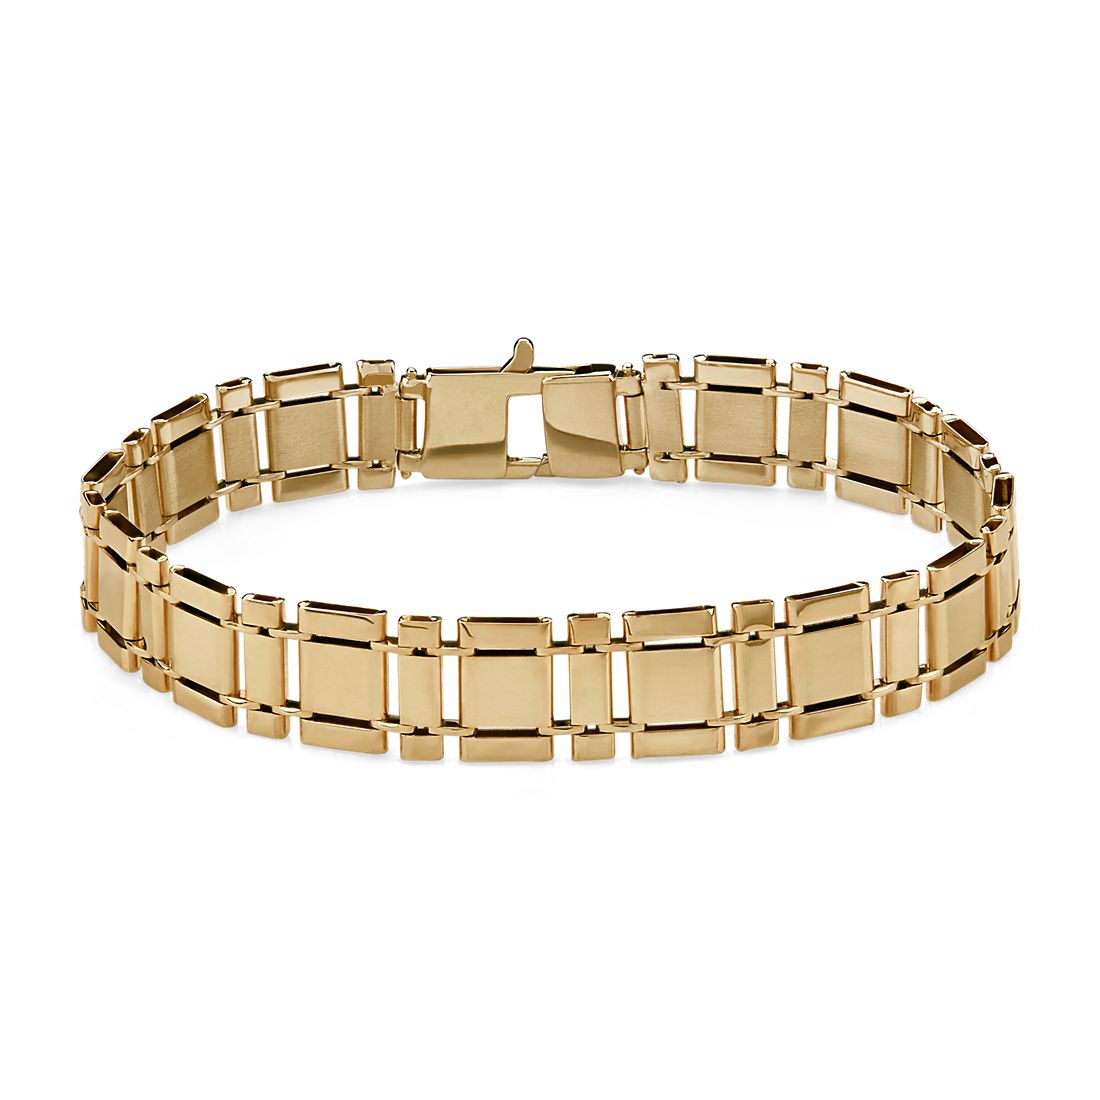 8.5" Men's Satin and Polished Link Bracelet in 14k Yellow Gold